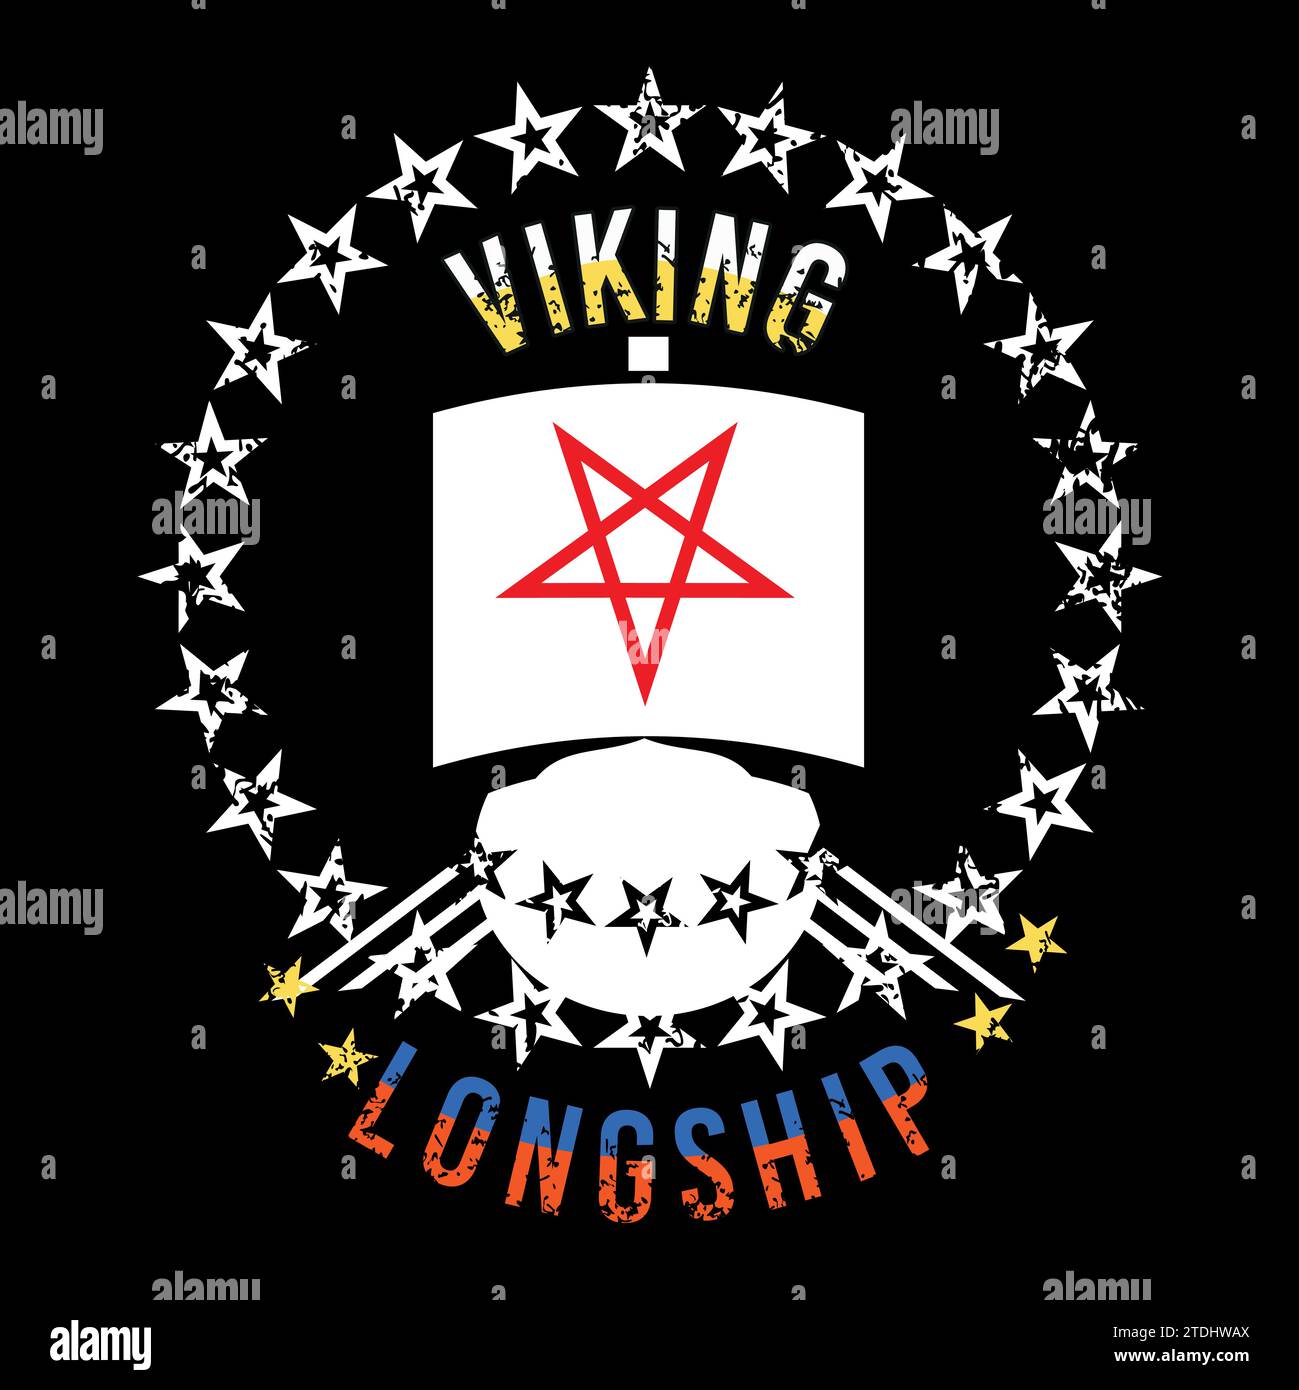 Viking Longship. T-shirt design of an old ship surrounded by stars ...